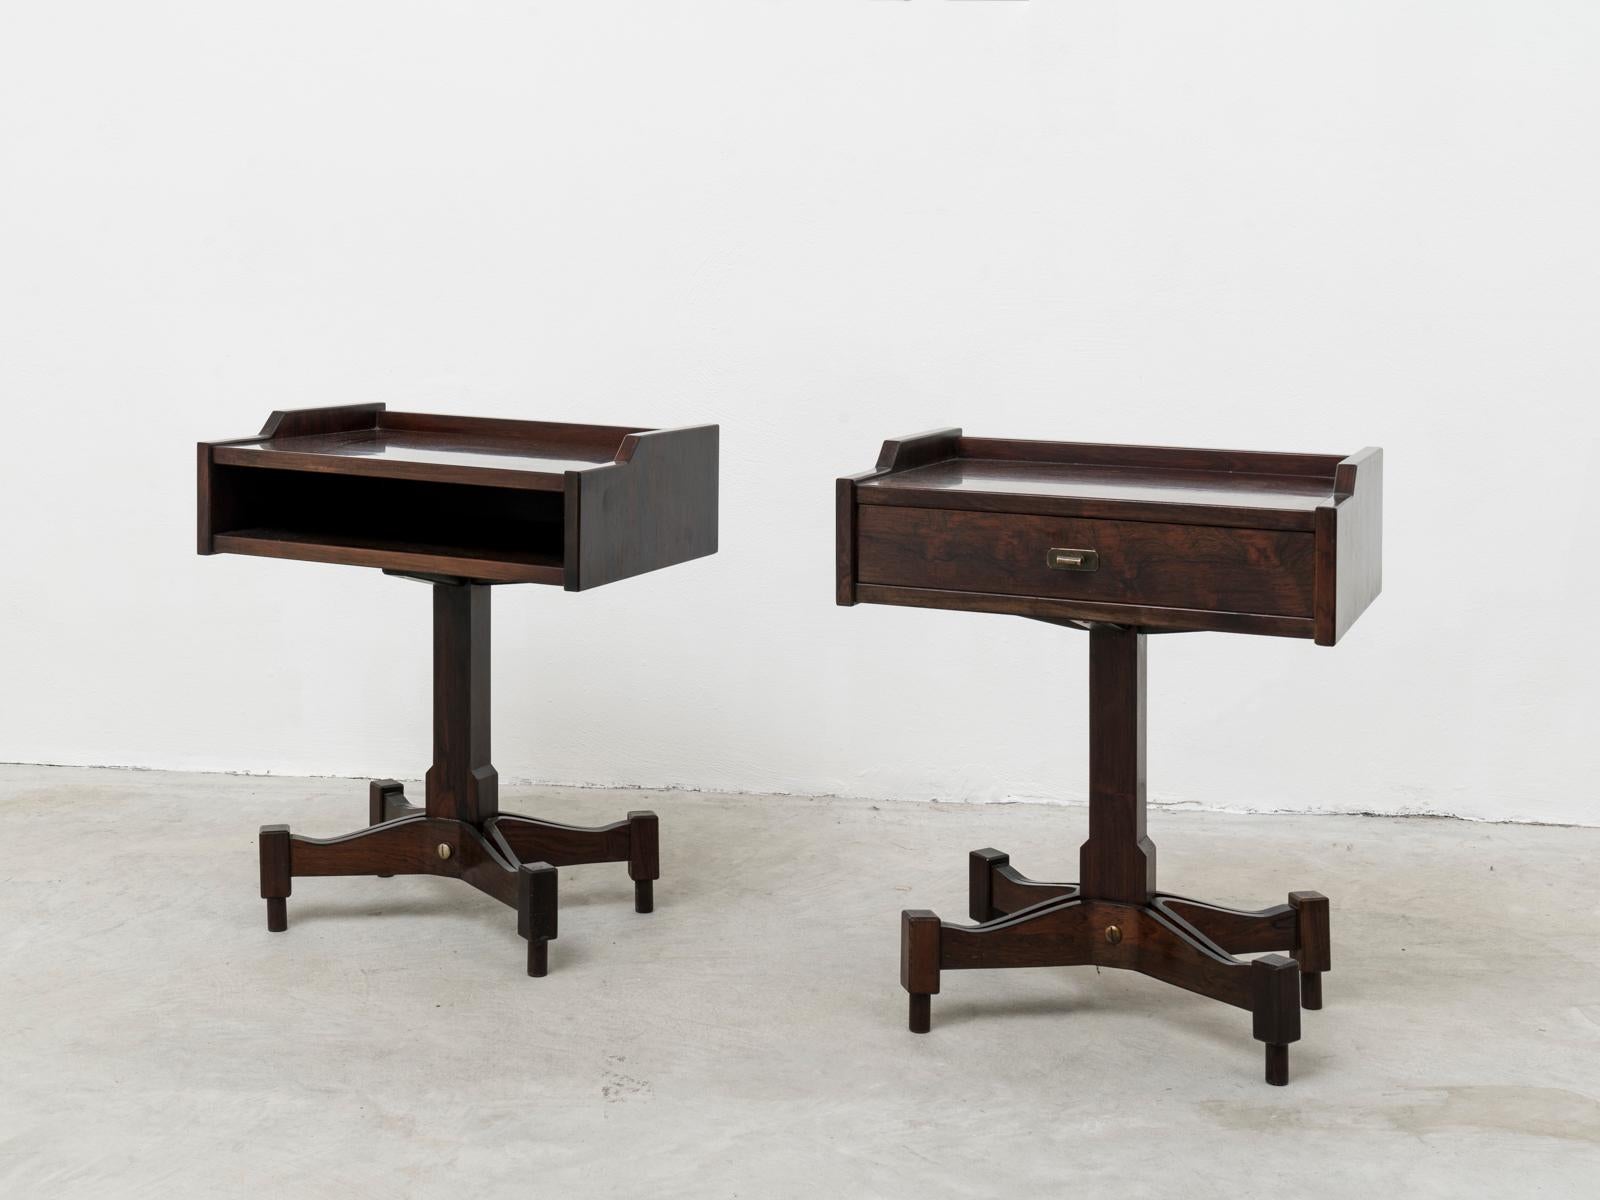 This pair of nightstands were designed by Italian architect, interior designer and professor Claudio Salocchi for Sormani in 1962. They are catalogued as model SC-50, also known as 